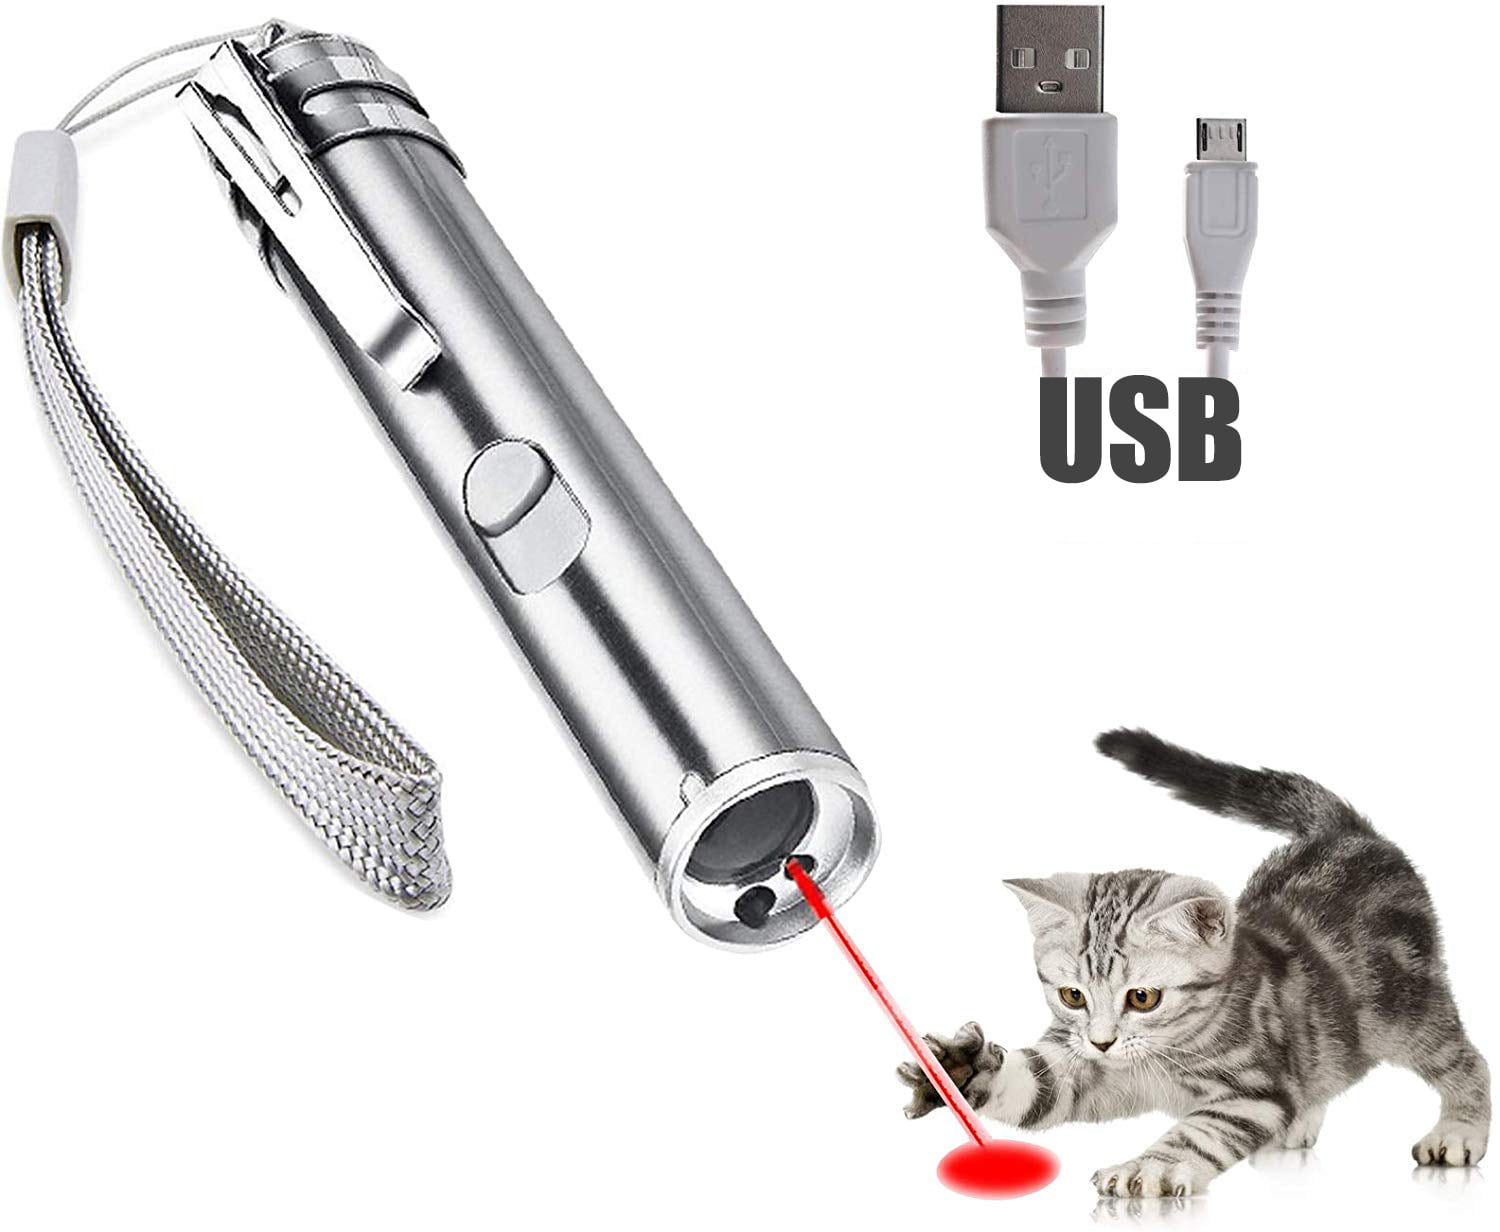 Red Laser Lazer Pointer Pen Cat Pet Teaser Toy High Professional Power Camping 